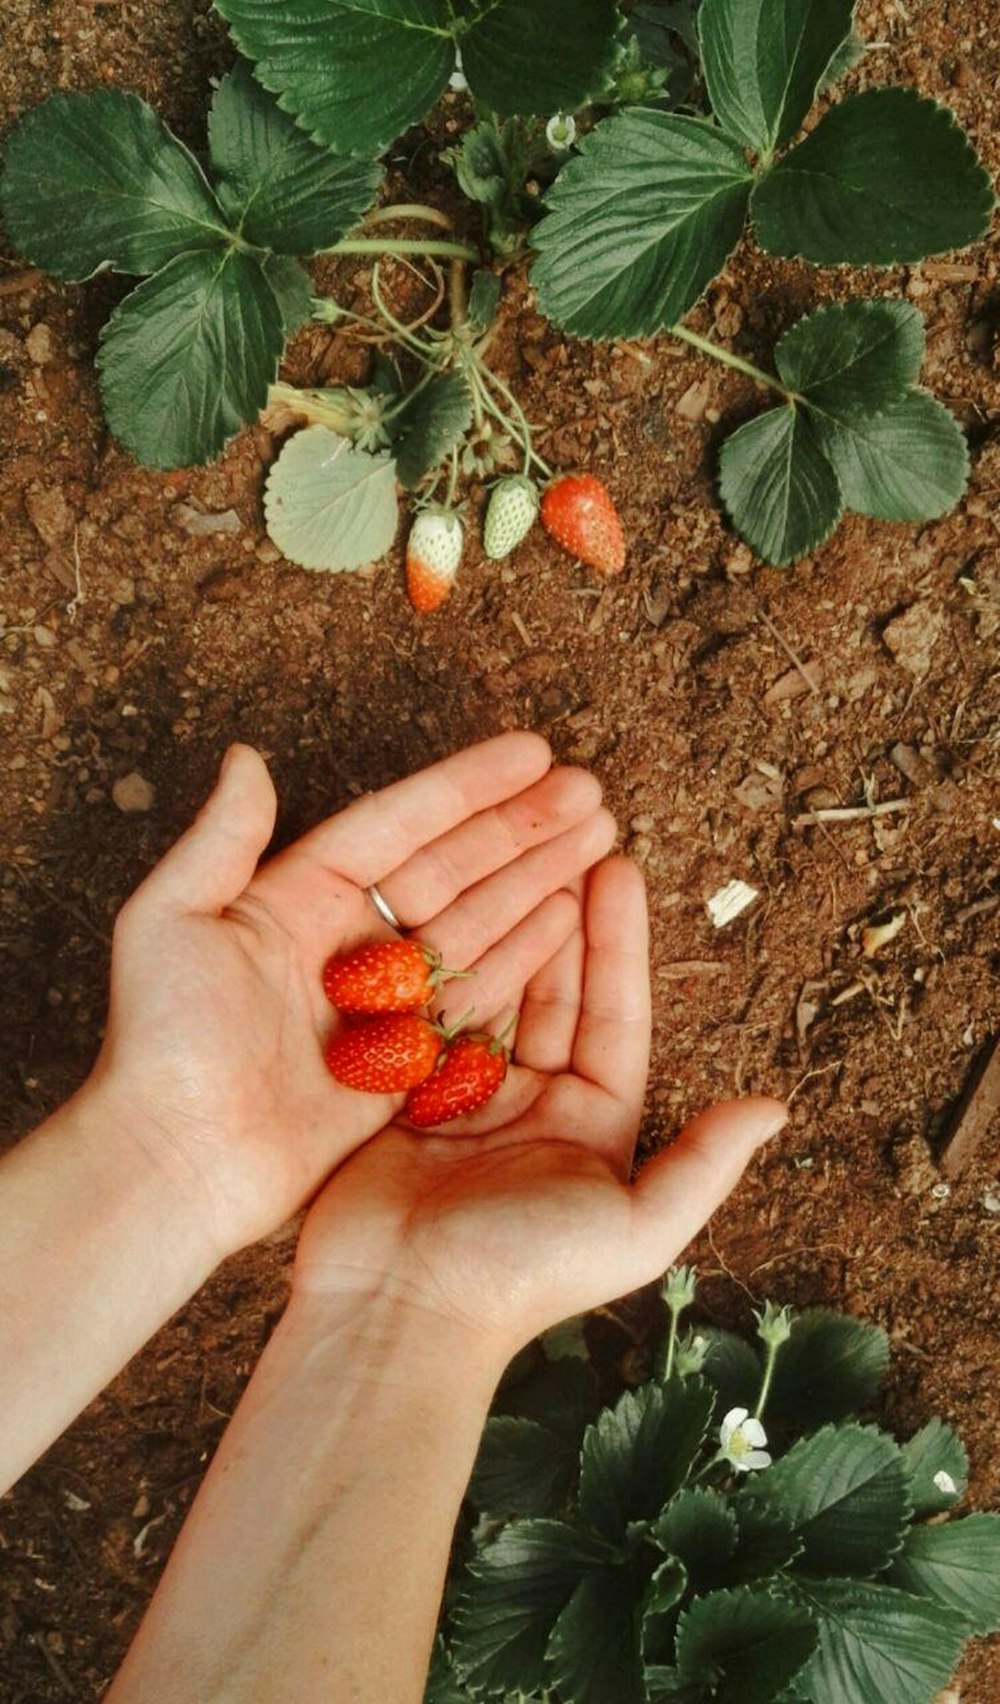 strawberries on persons hand